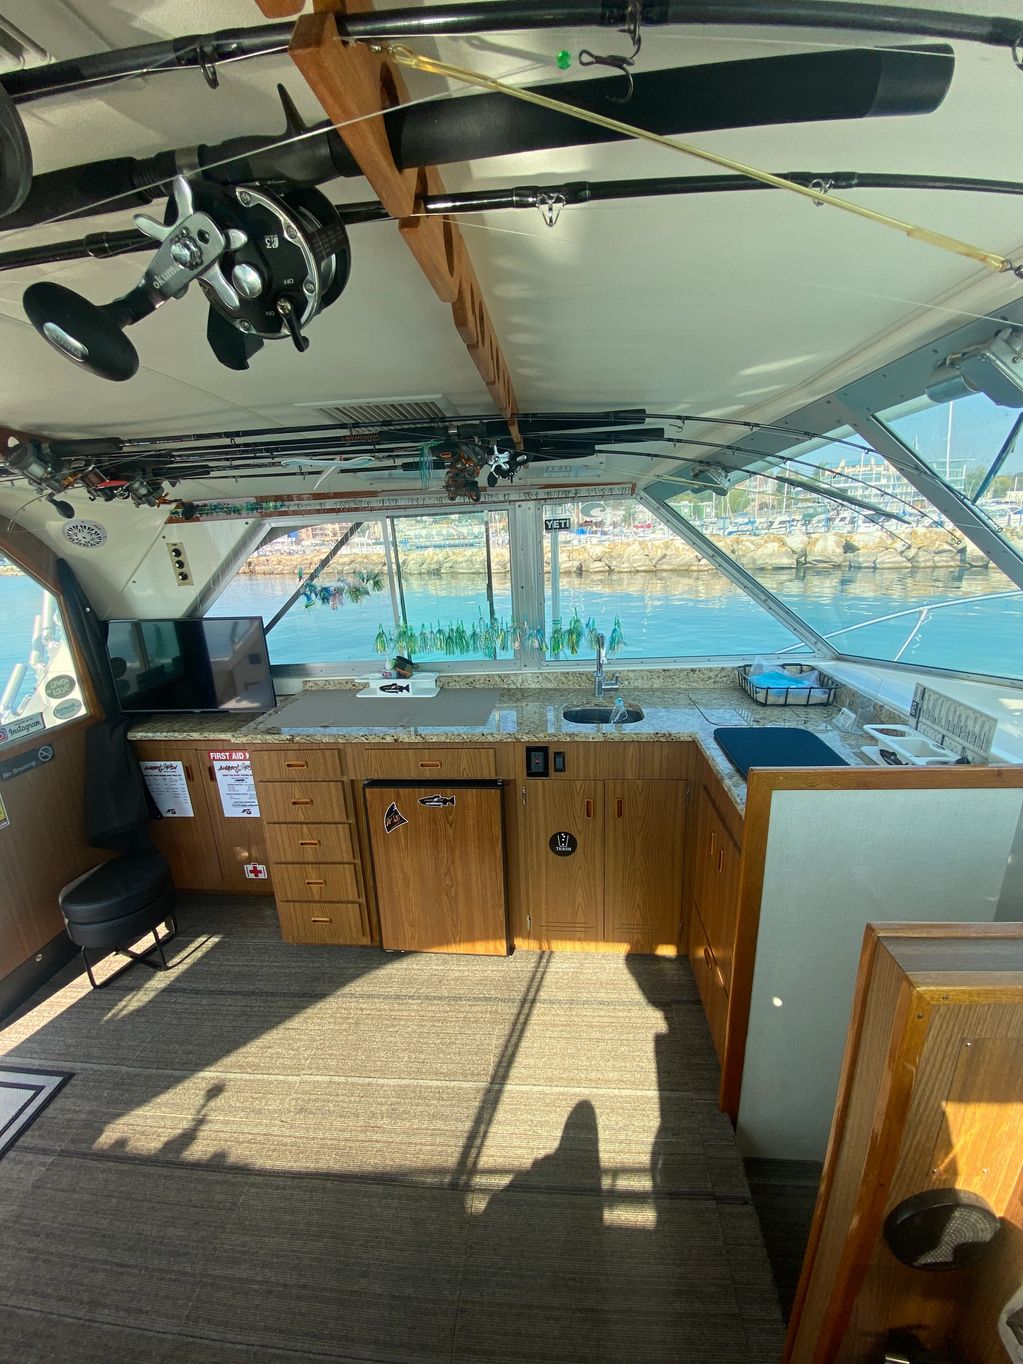 Our spacious updated cabin, to make any fishing charter comfortable. Best fishing charters!